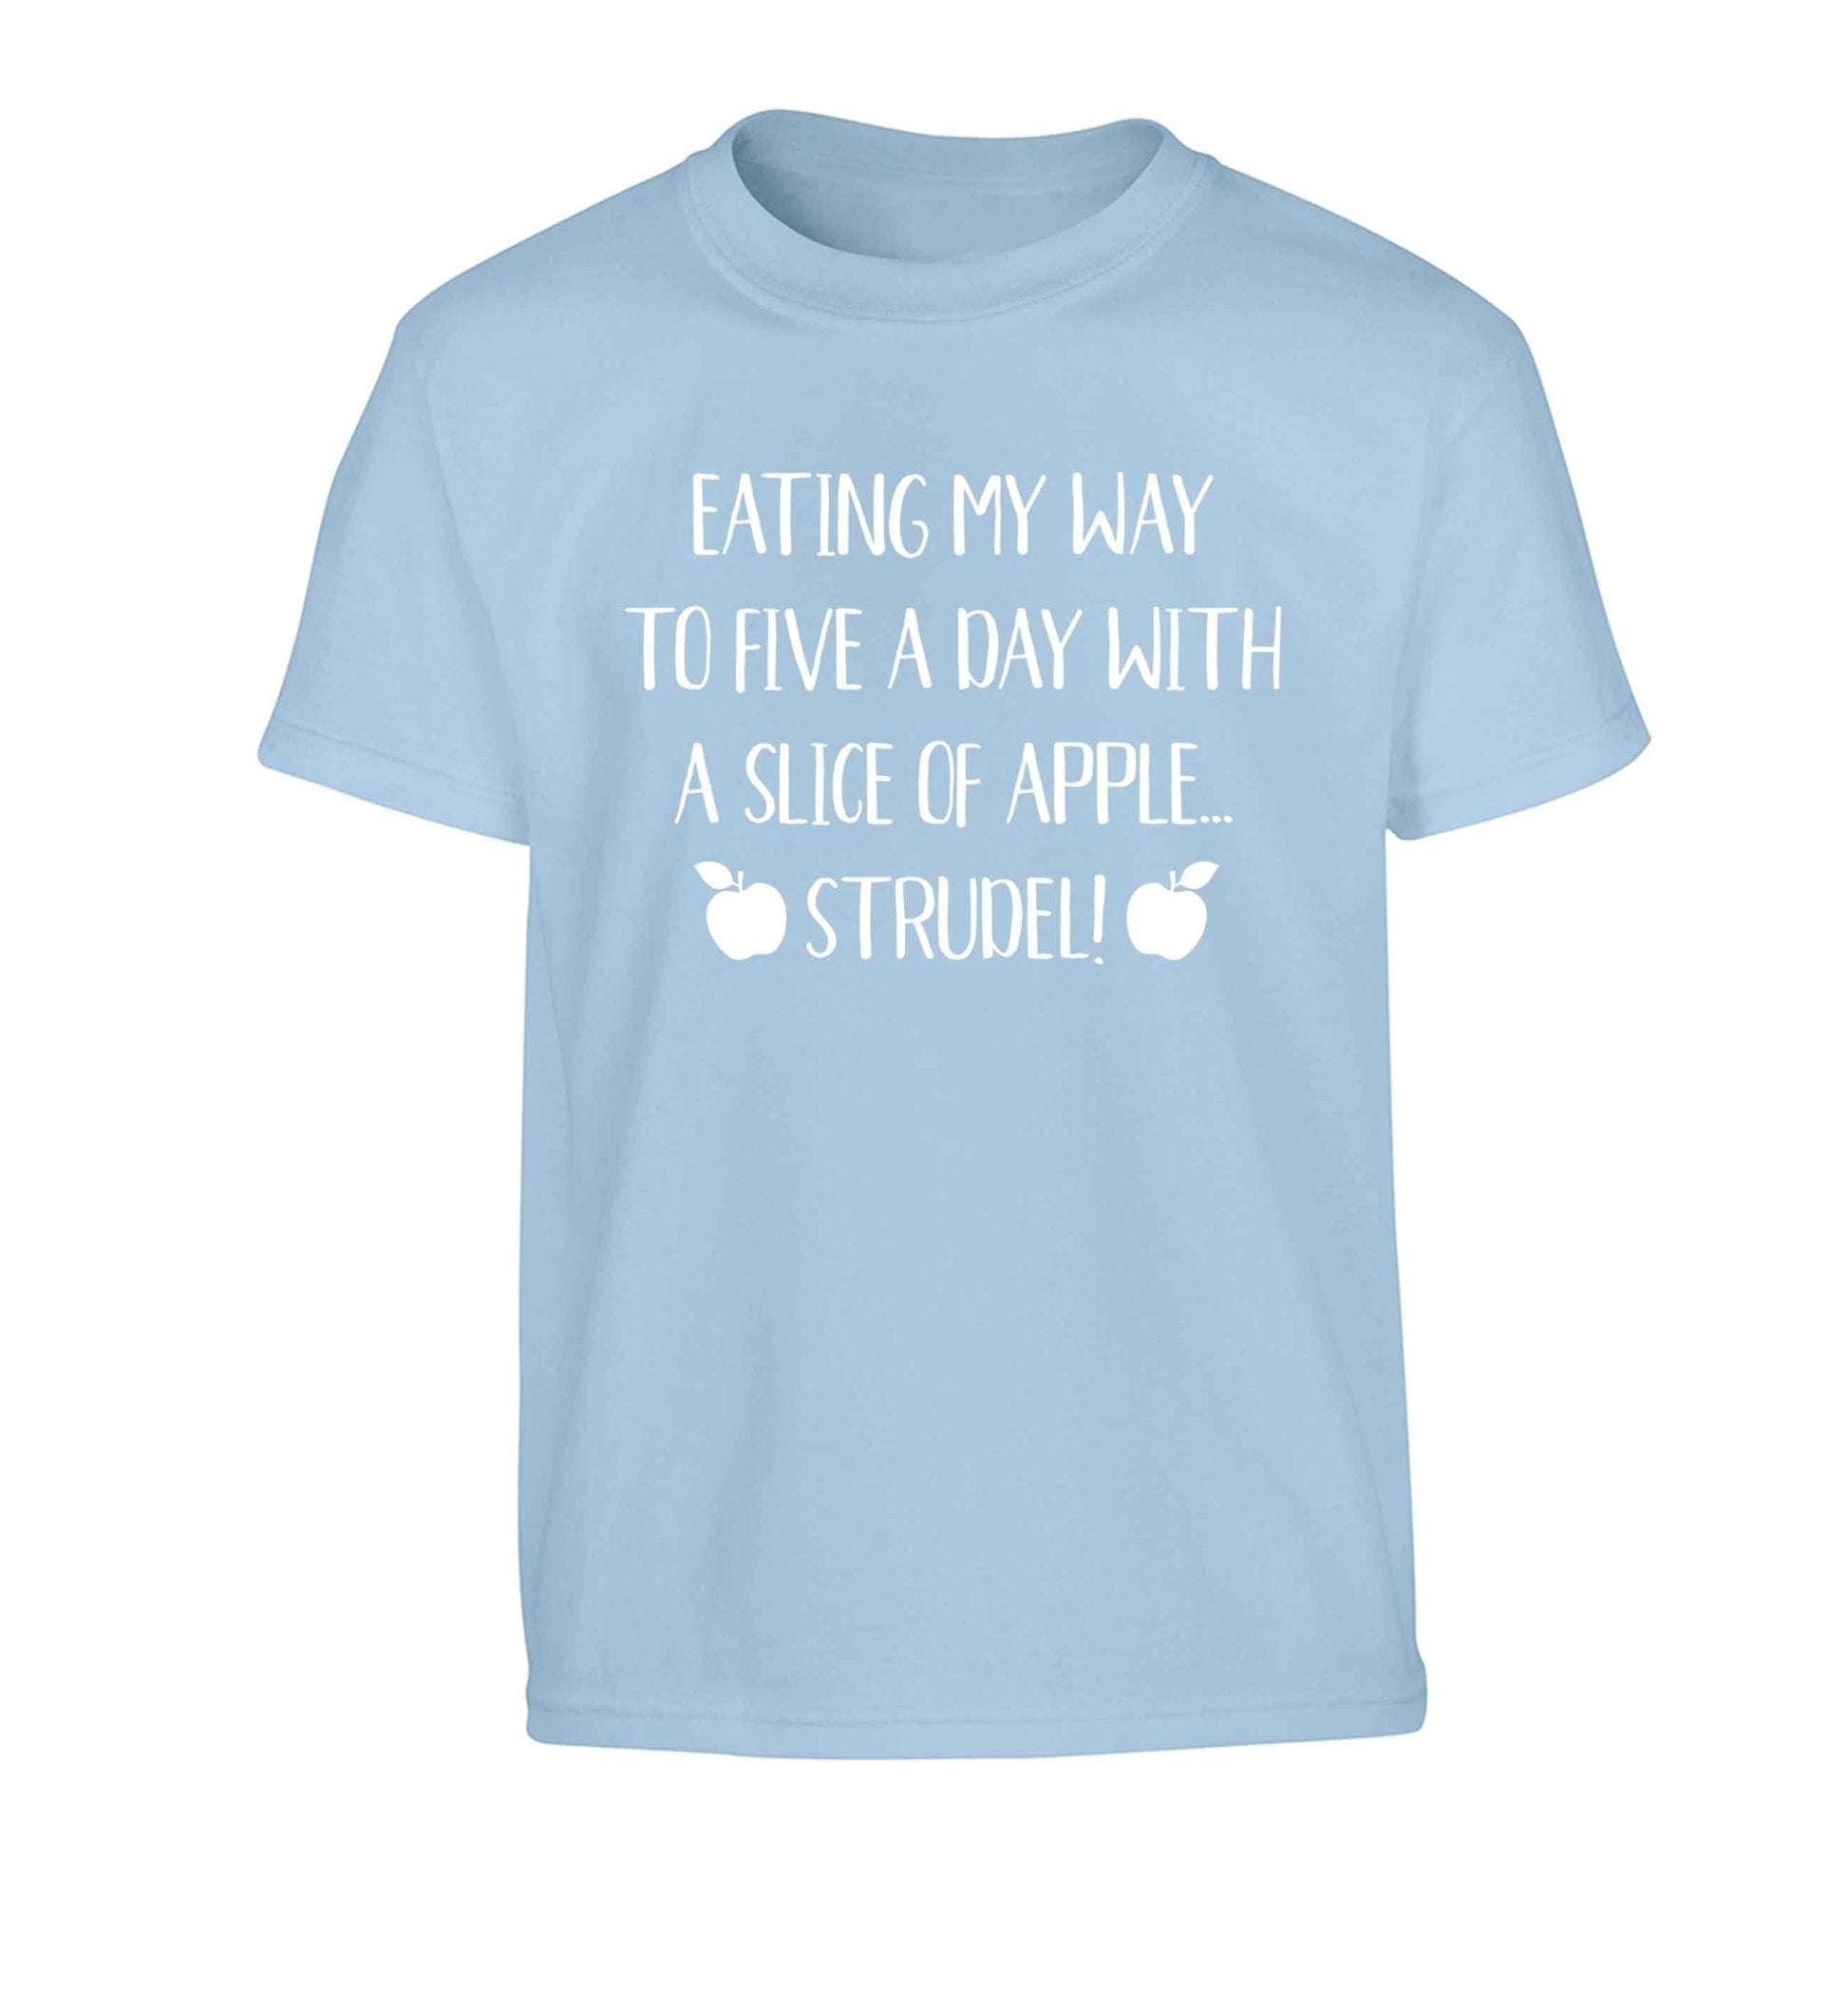 Eating my way to five a day with a slice of apple strudel Children's light blue Tshirt 12-13 Years